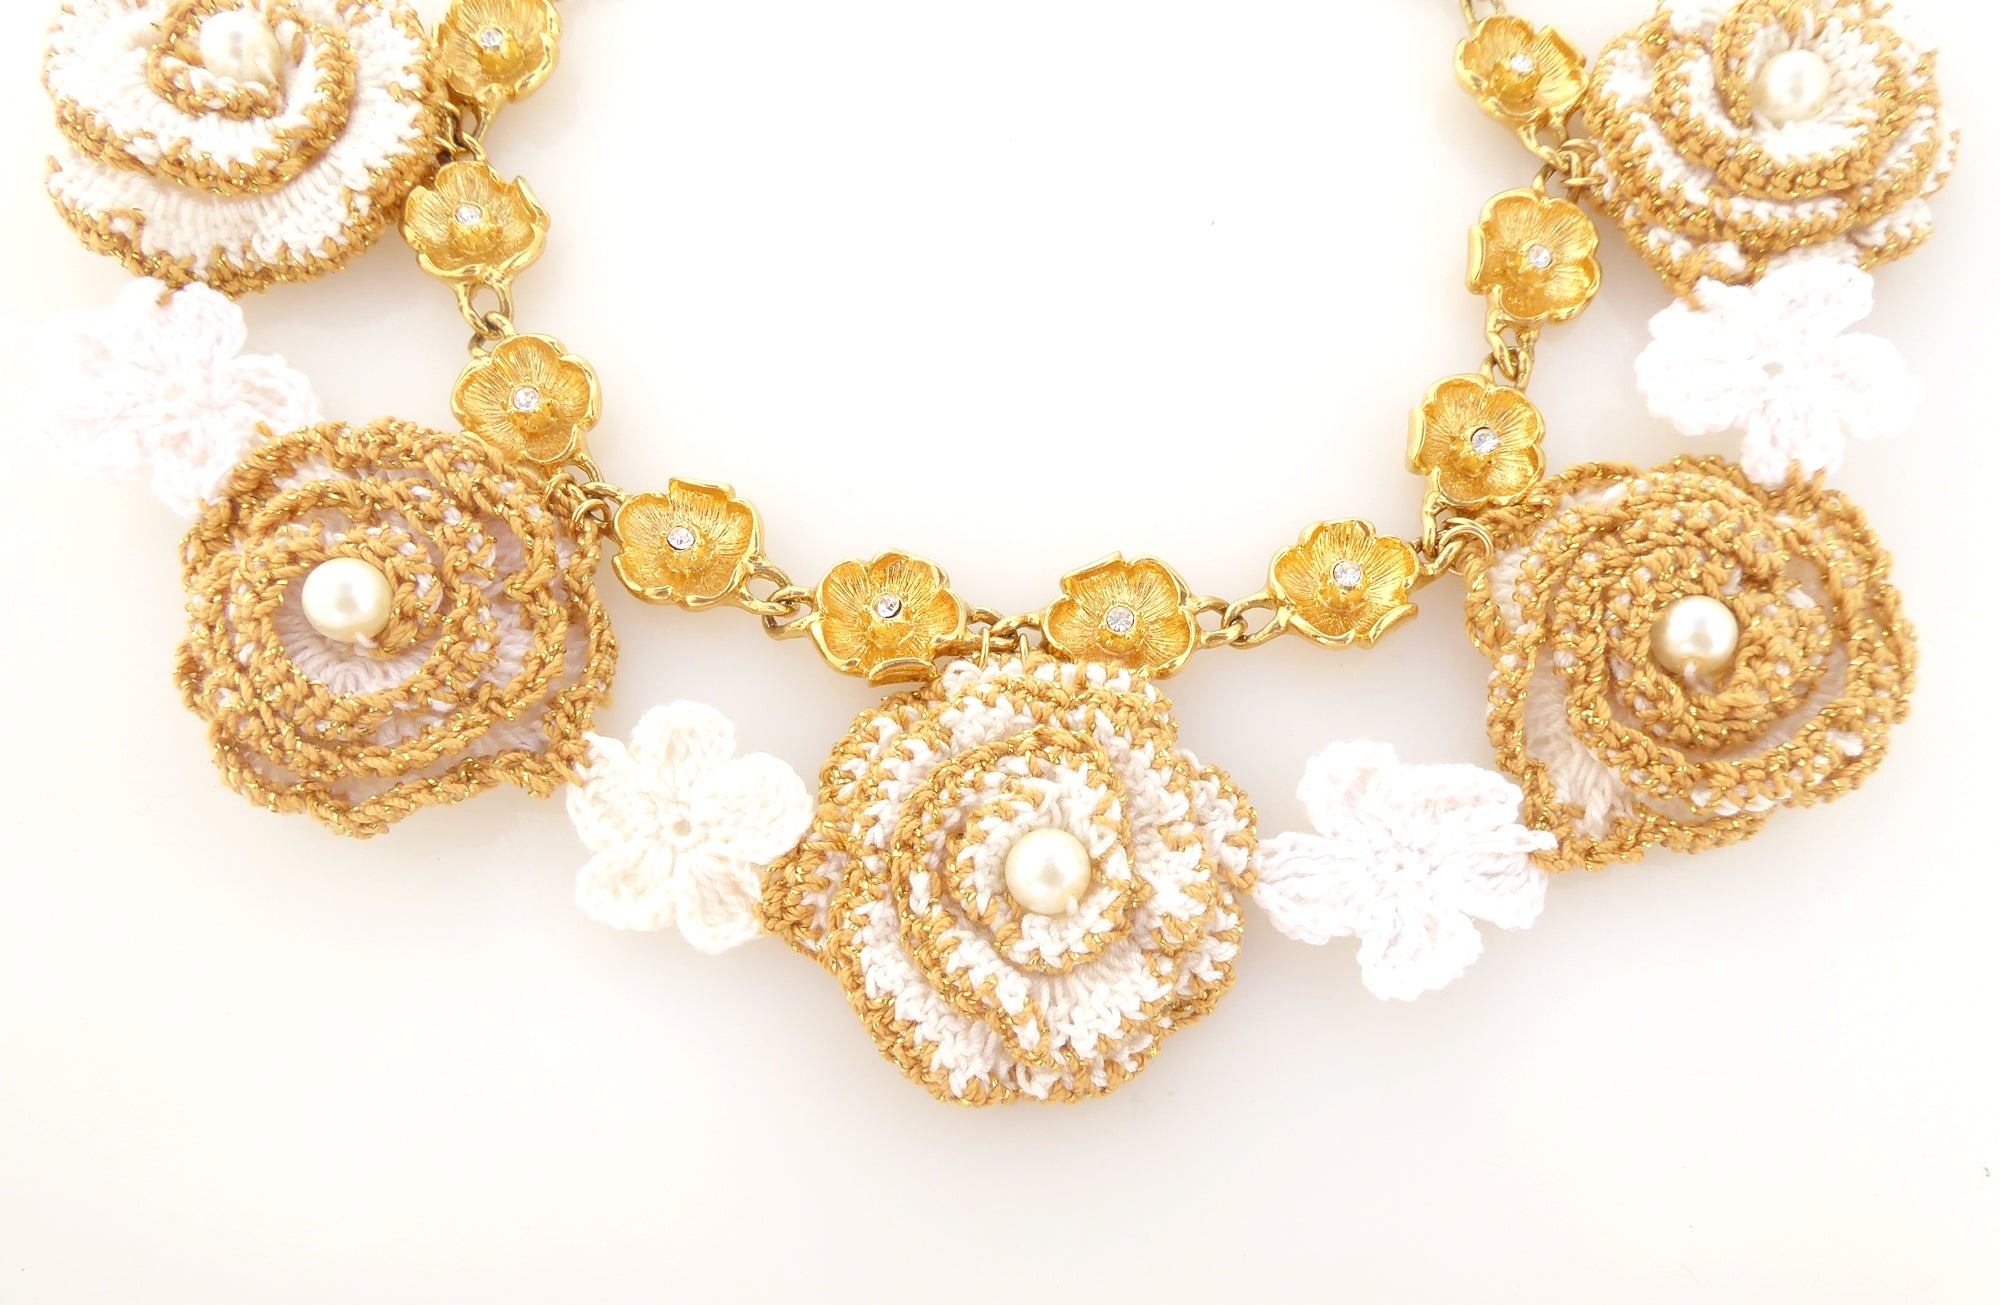 Gold and white crochet flower necklace by Jenny Dayco 6